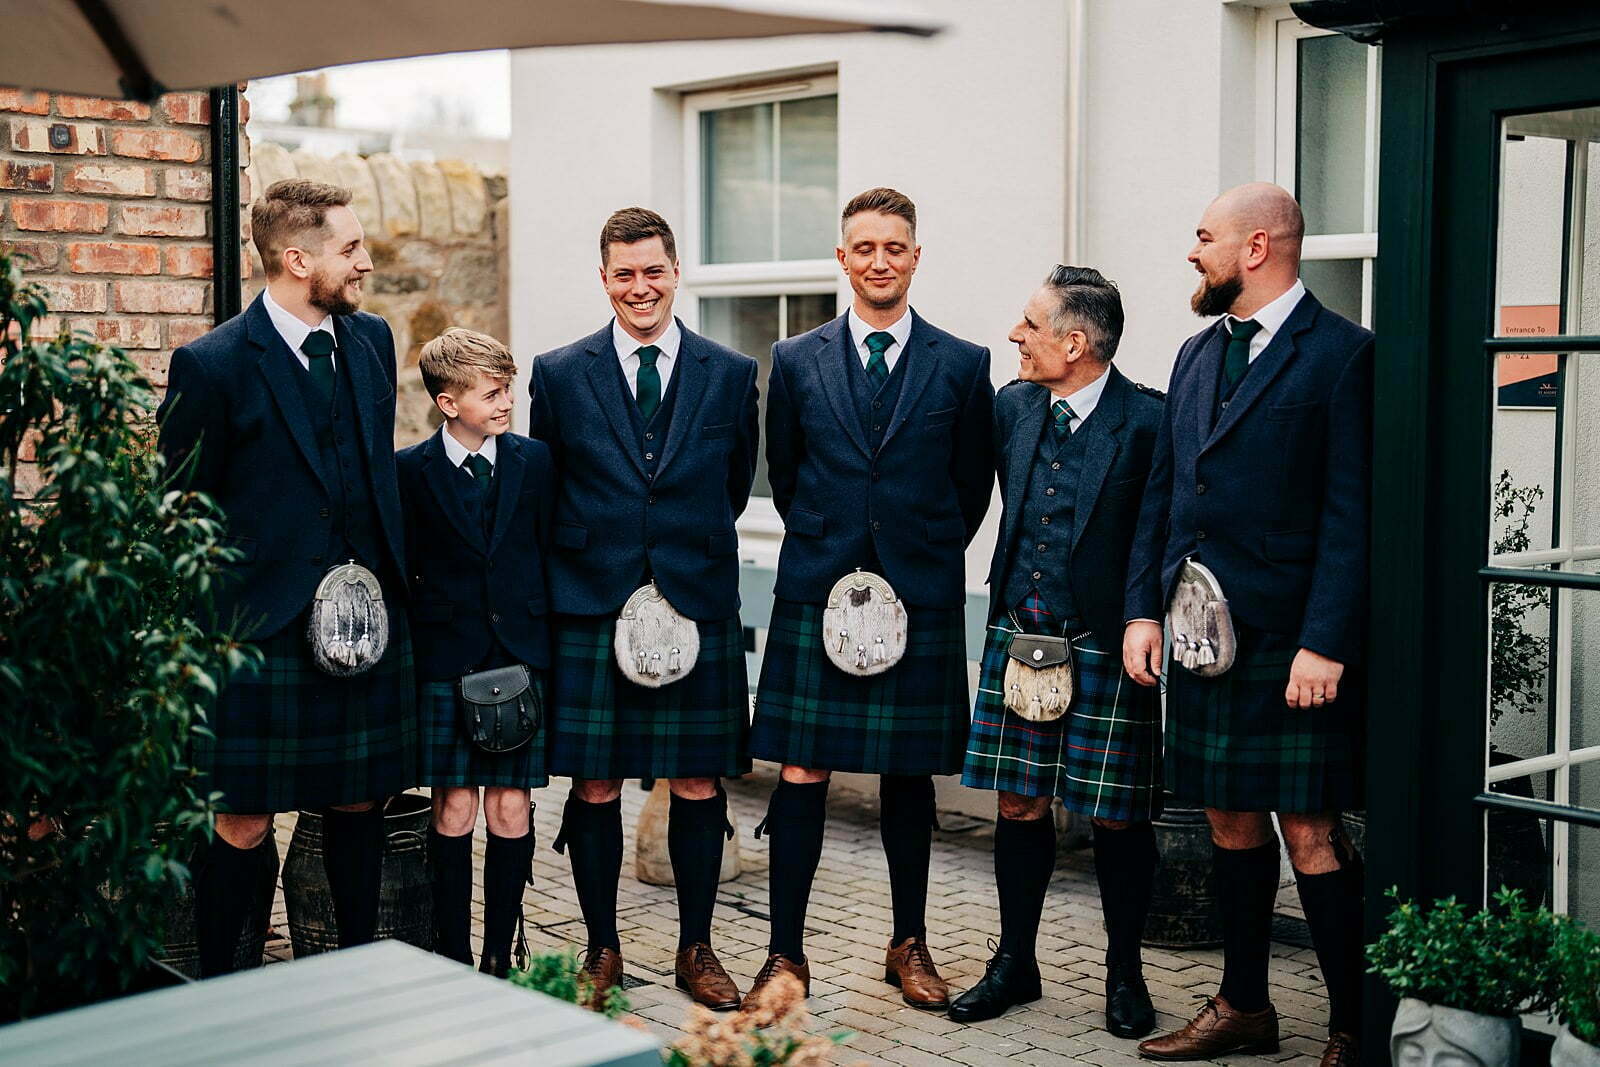 colourful forgans micro wedding outdoor champagne celebrations bride bridesmaids matching robes fluffy slippers groom groomsen navy suit jacket traditional kilt sporran